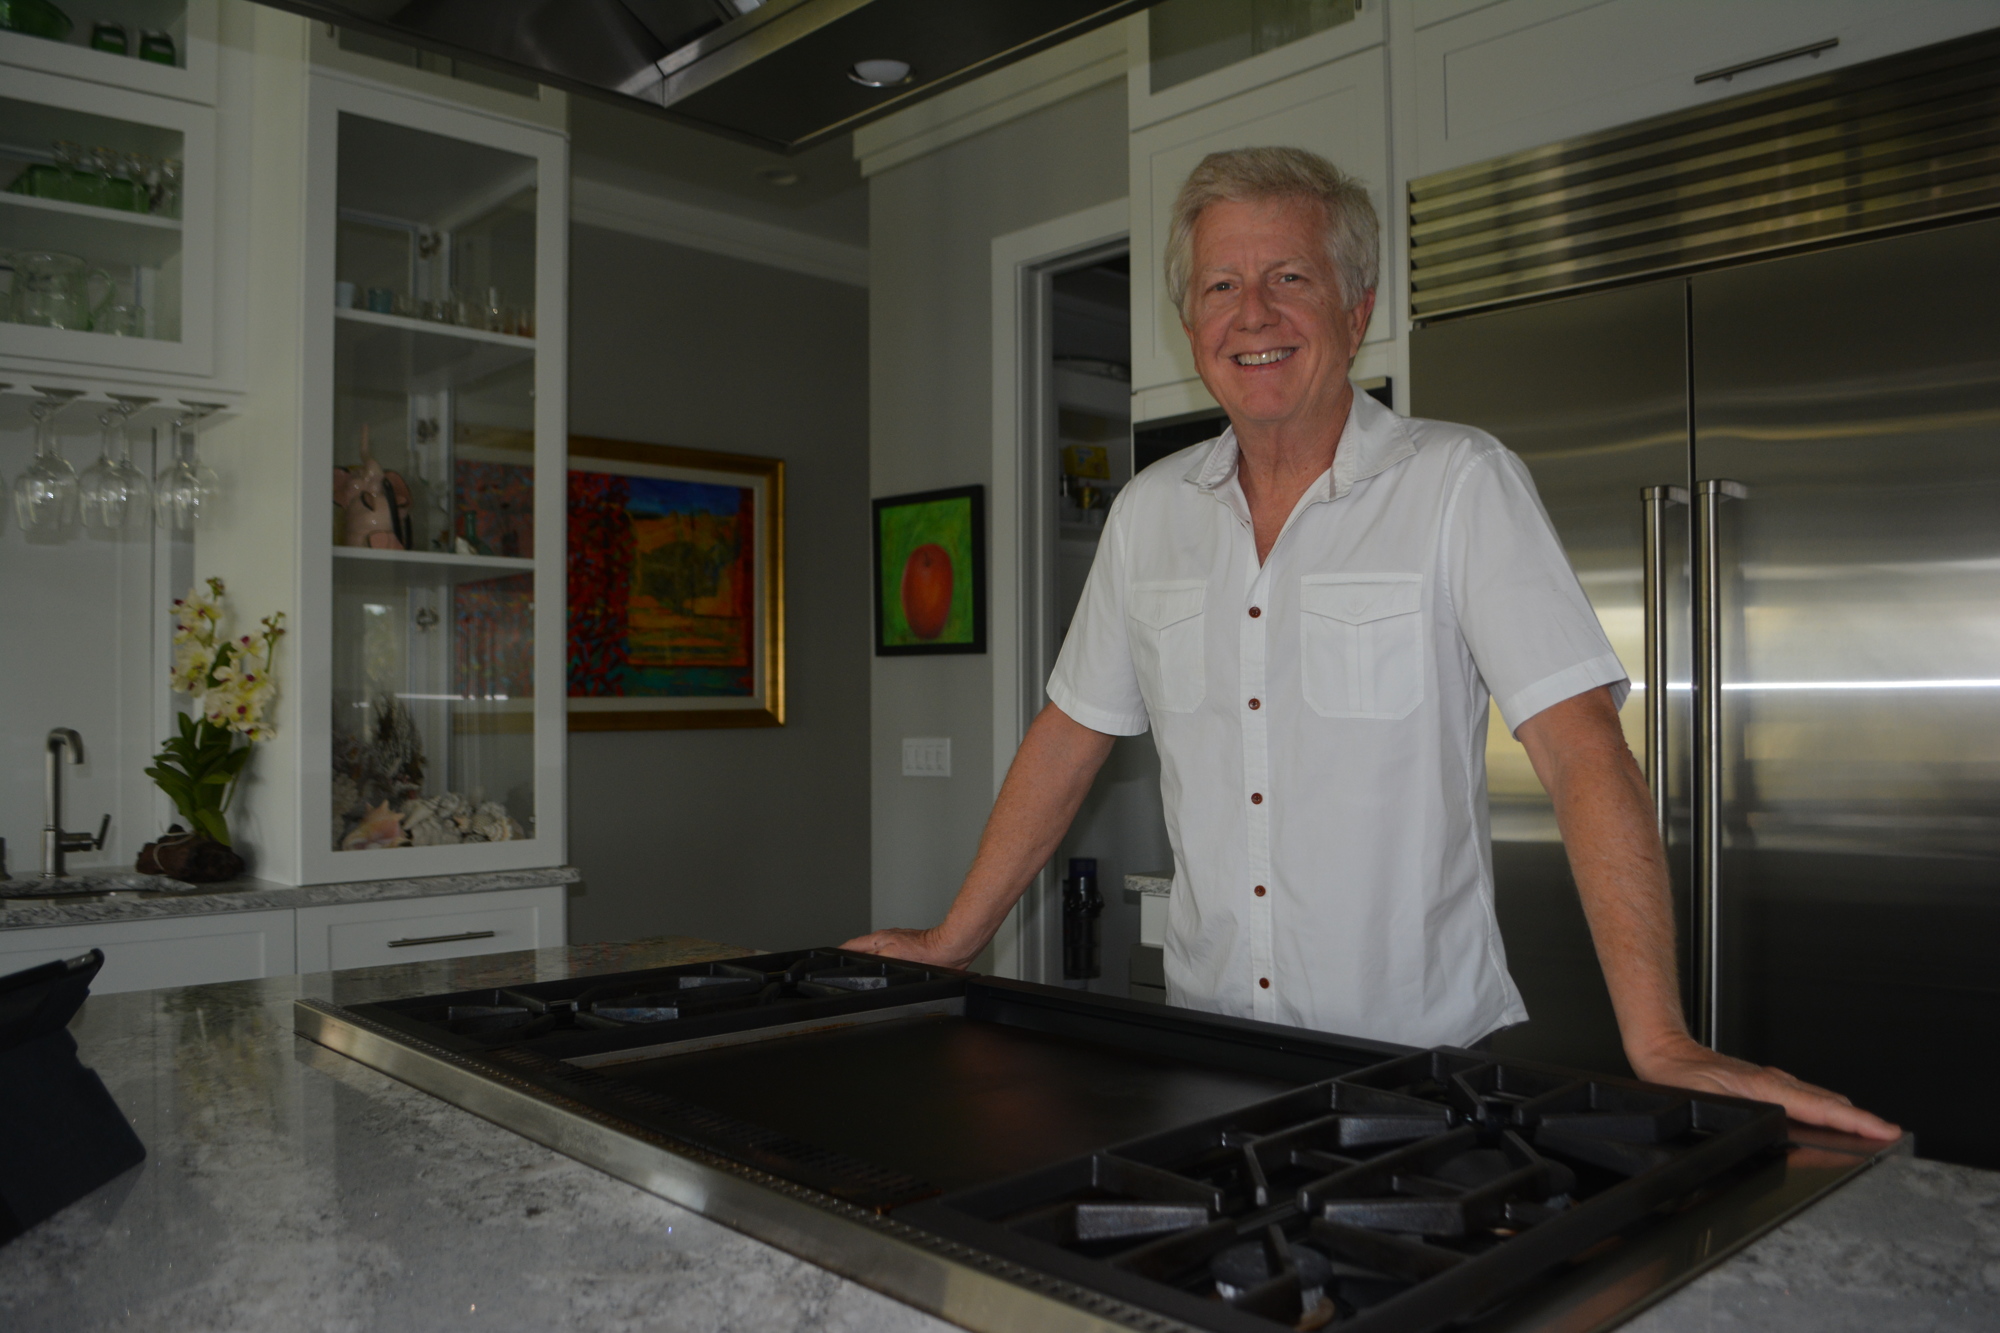 Scott Fore loves to cook so he paid particular attention to the design of his gourmet kitchen.